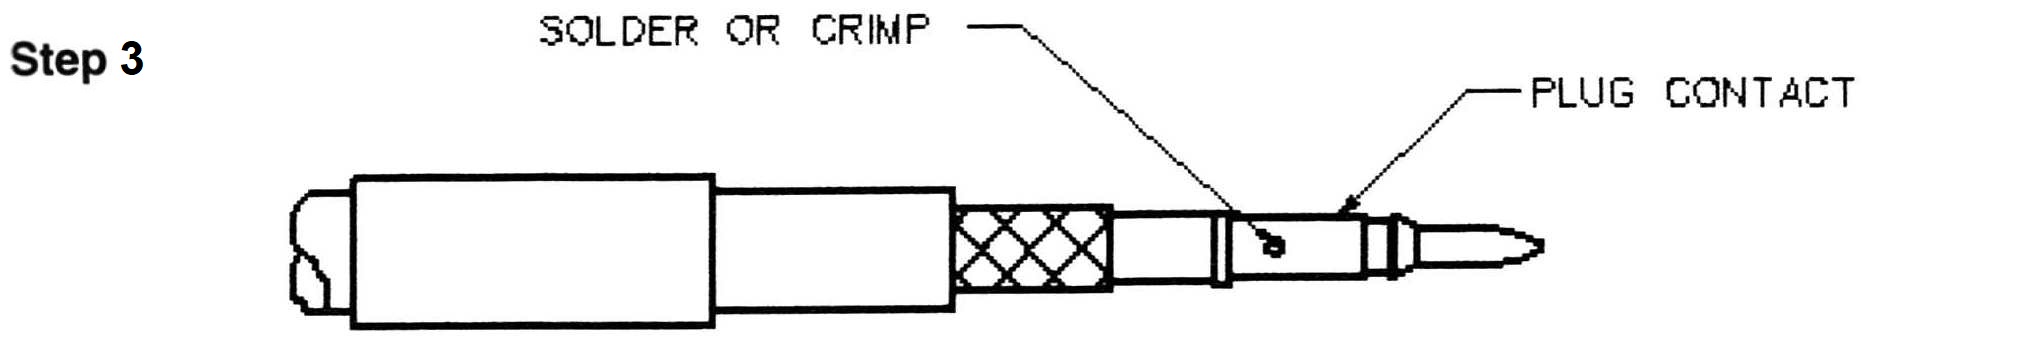 BNC male Crimp On for RG-58, LMR-195 7005-BNC-58 Installation Guide step 3 - Max-Gain Systems Inc